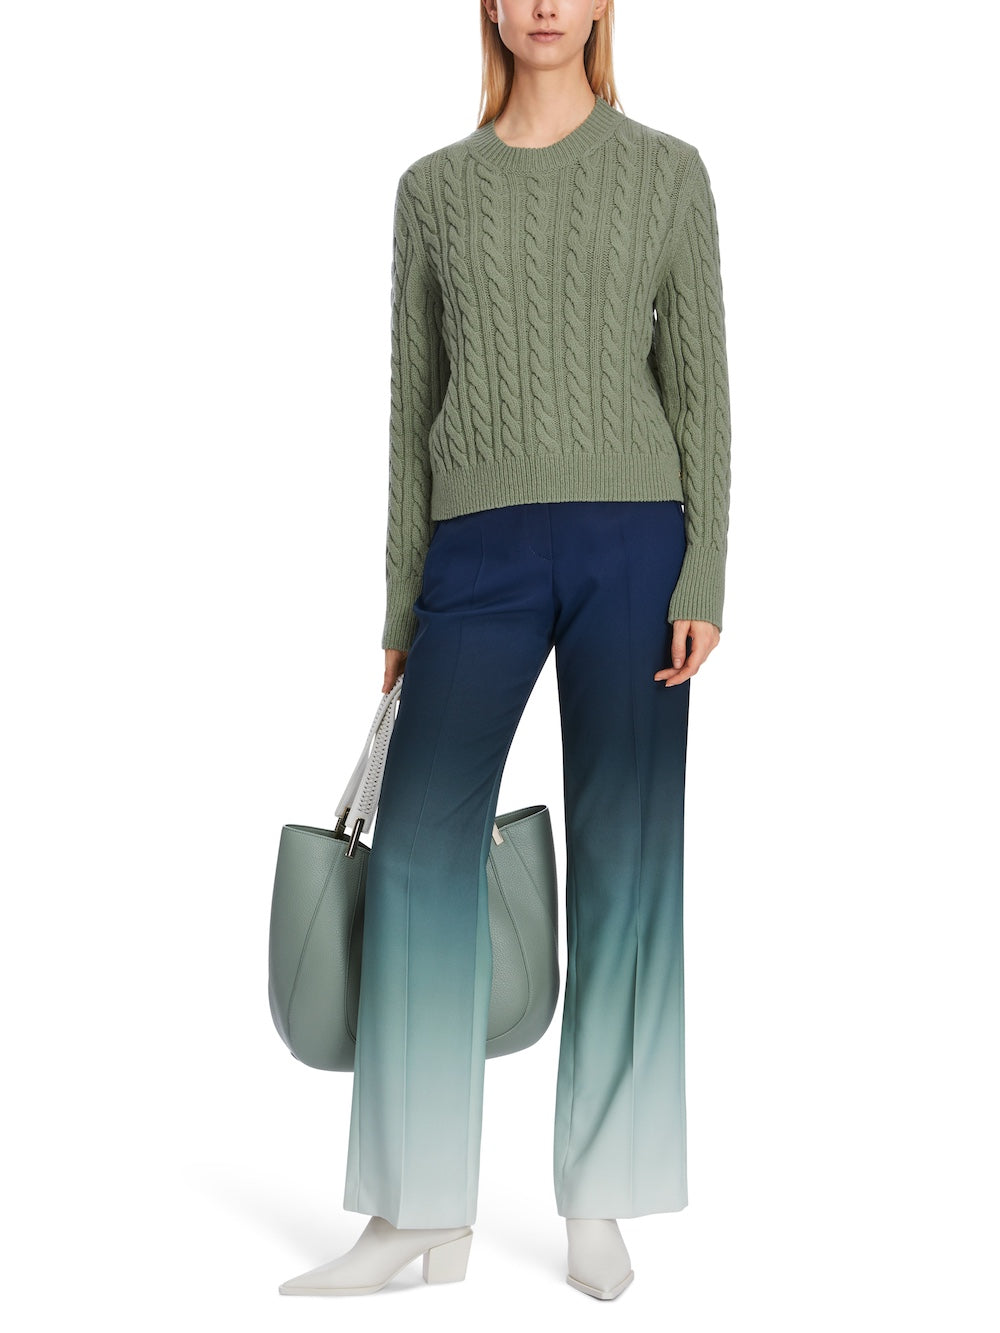 Frozen Sage Cable Knit Sweater